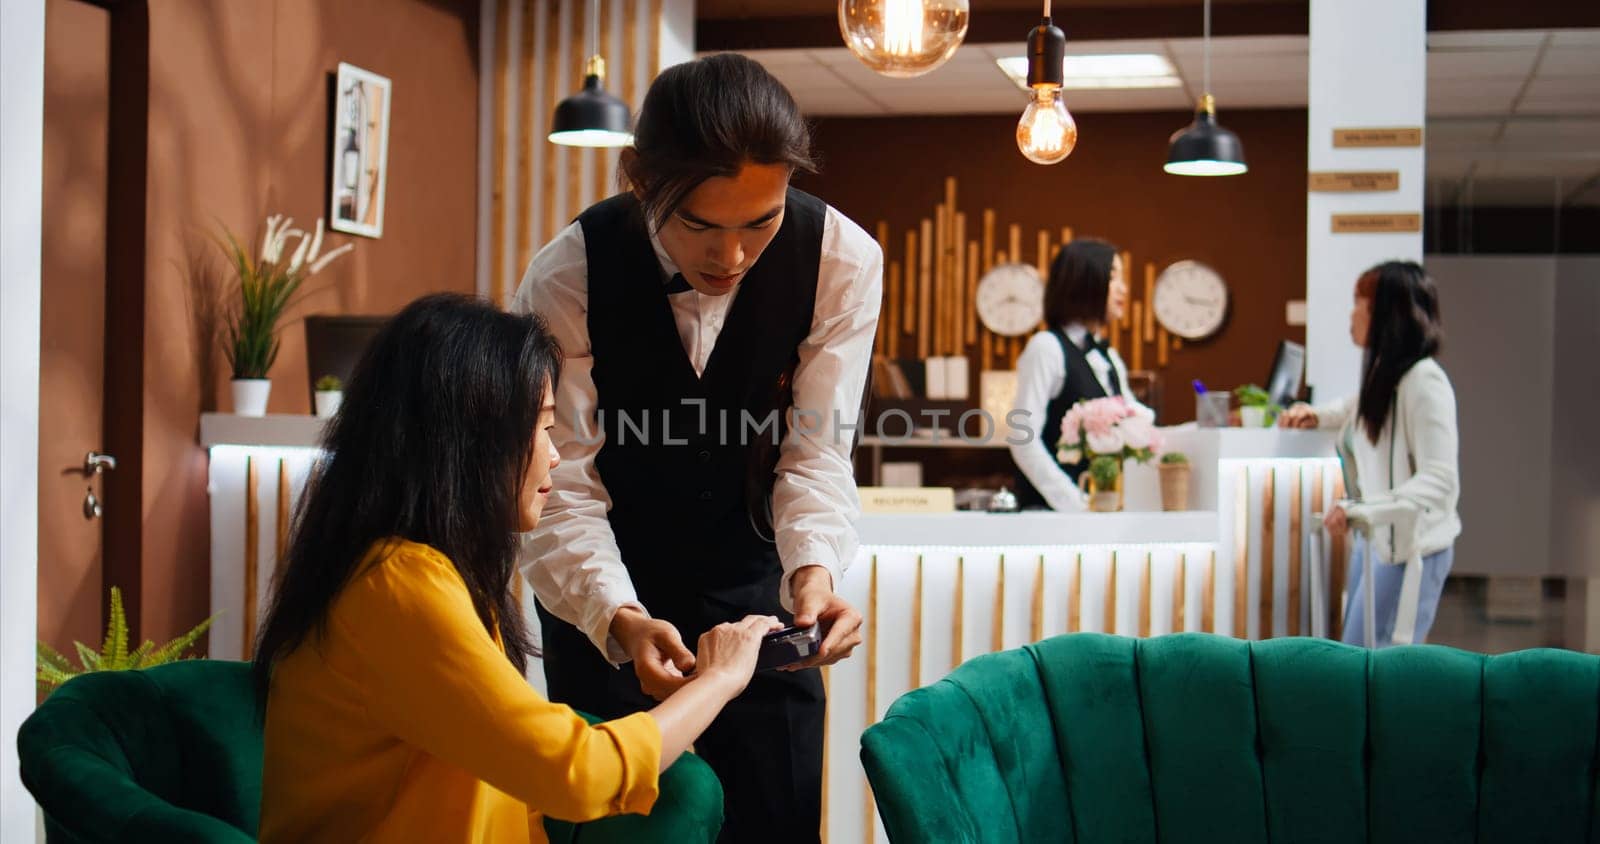 Hotel guest paying for drink and giving cash to worker by DCStudio